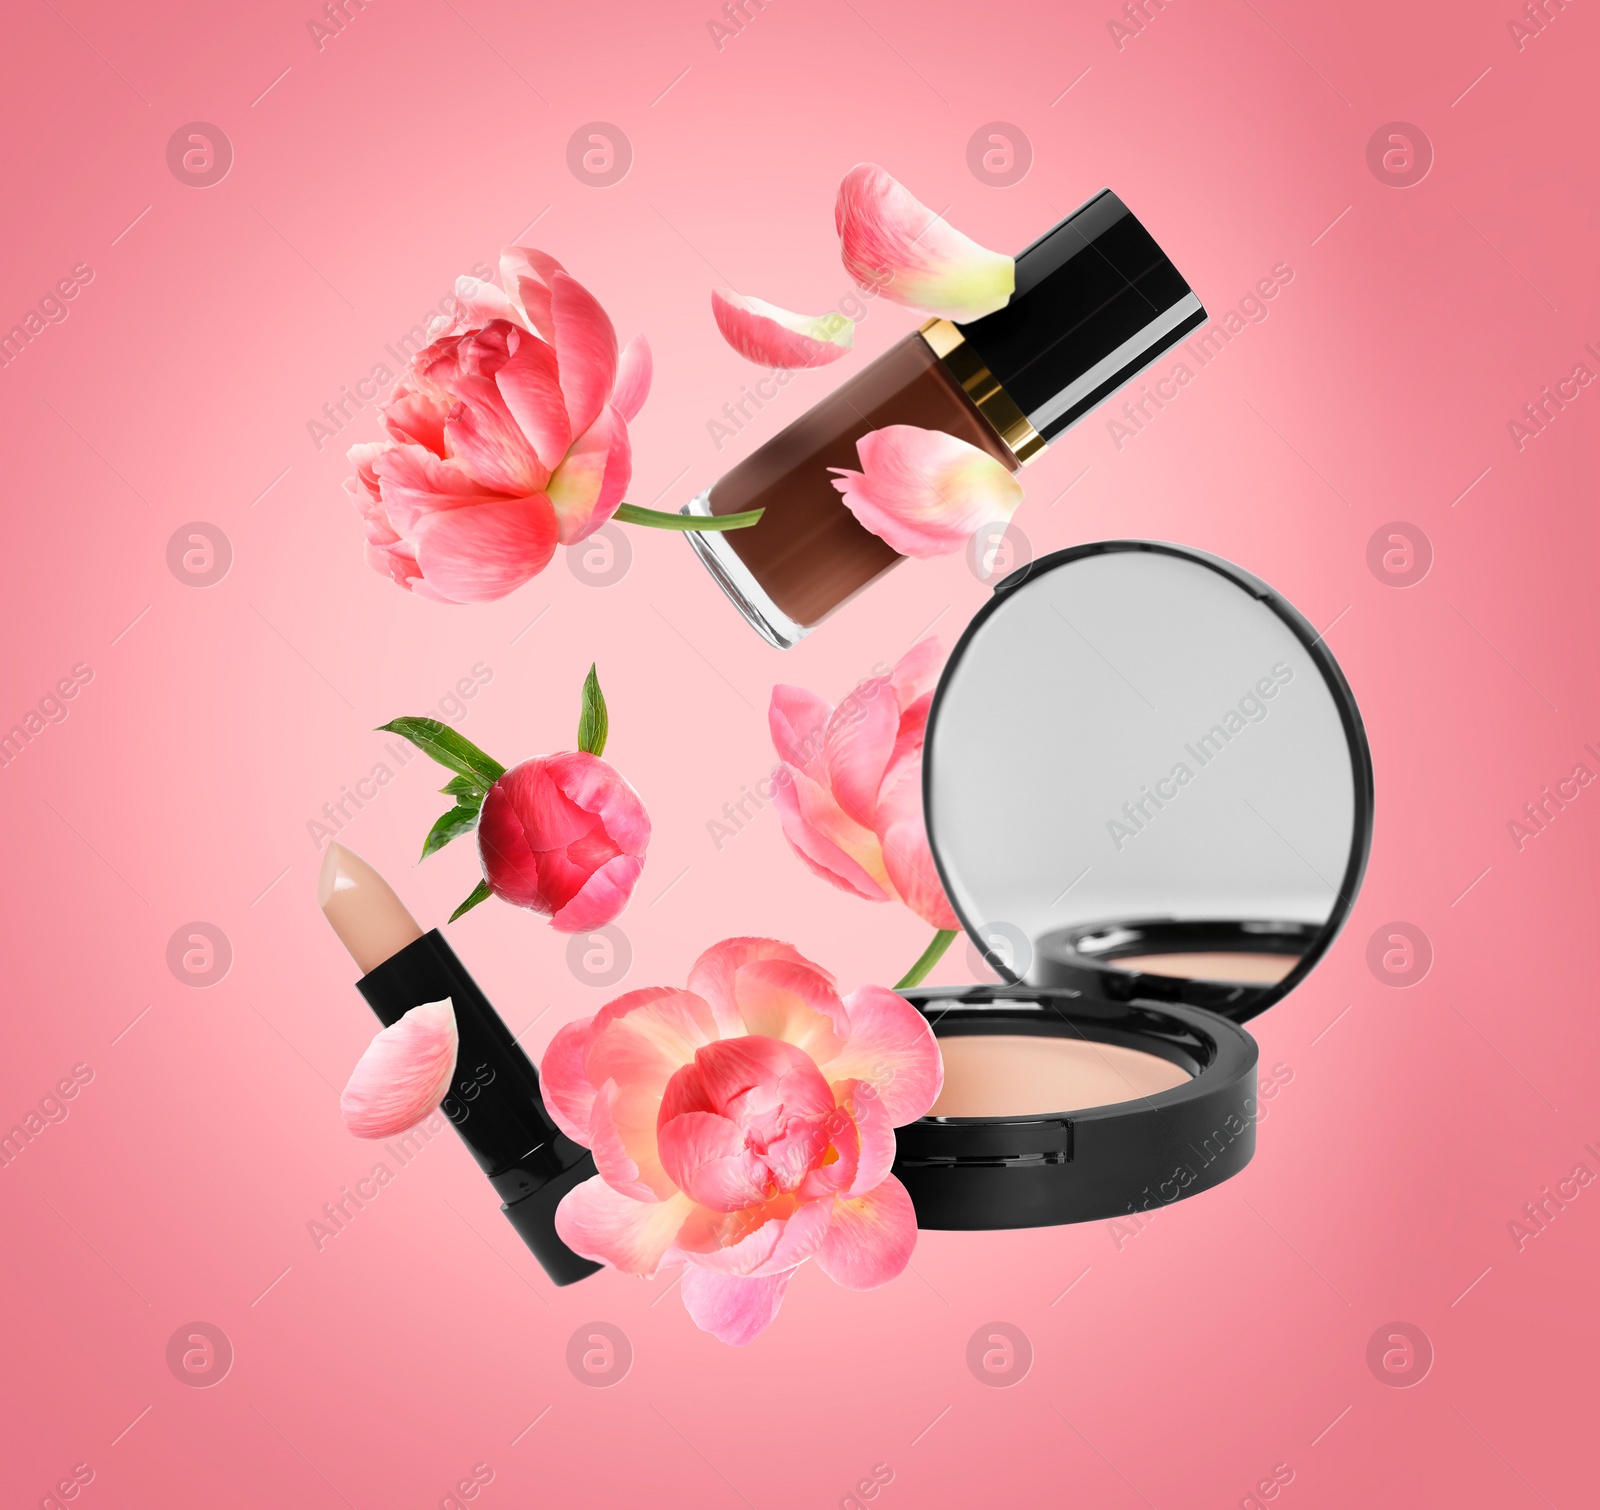 Image of Spring flowers and makeup products in air on coral color background